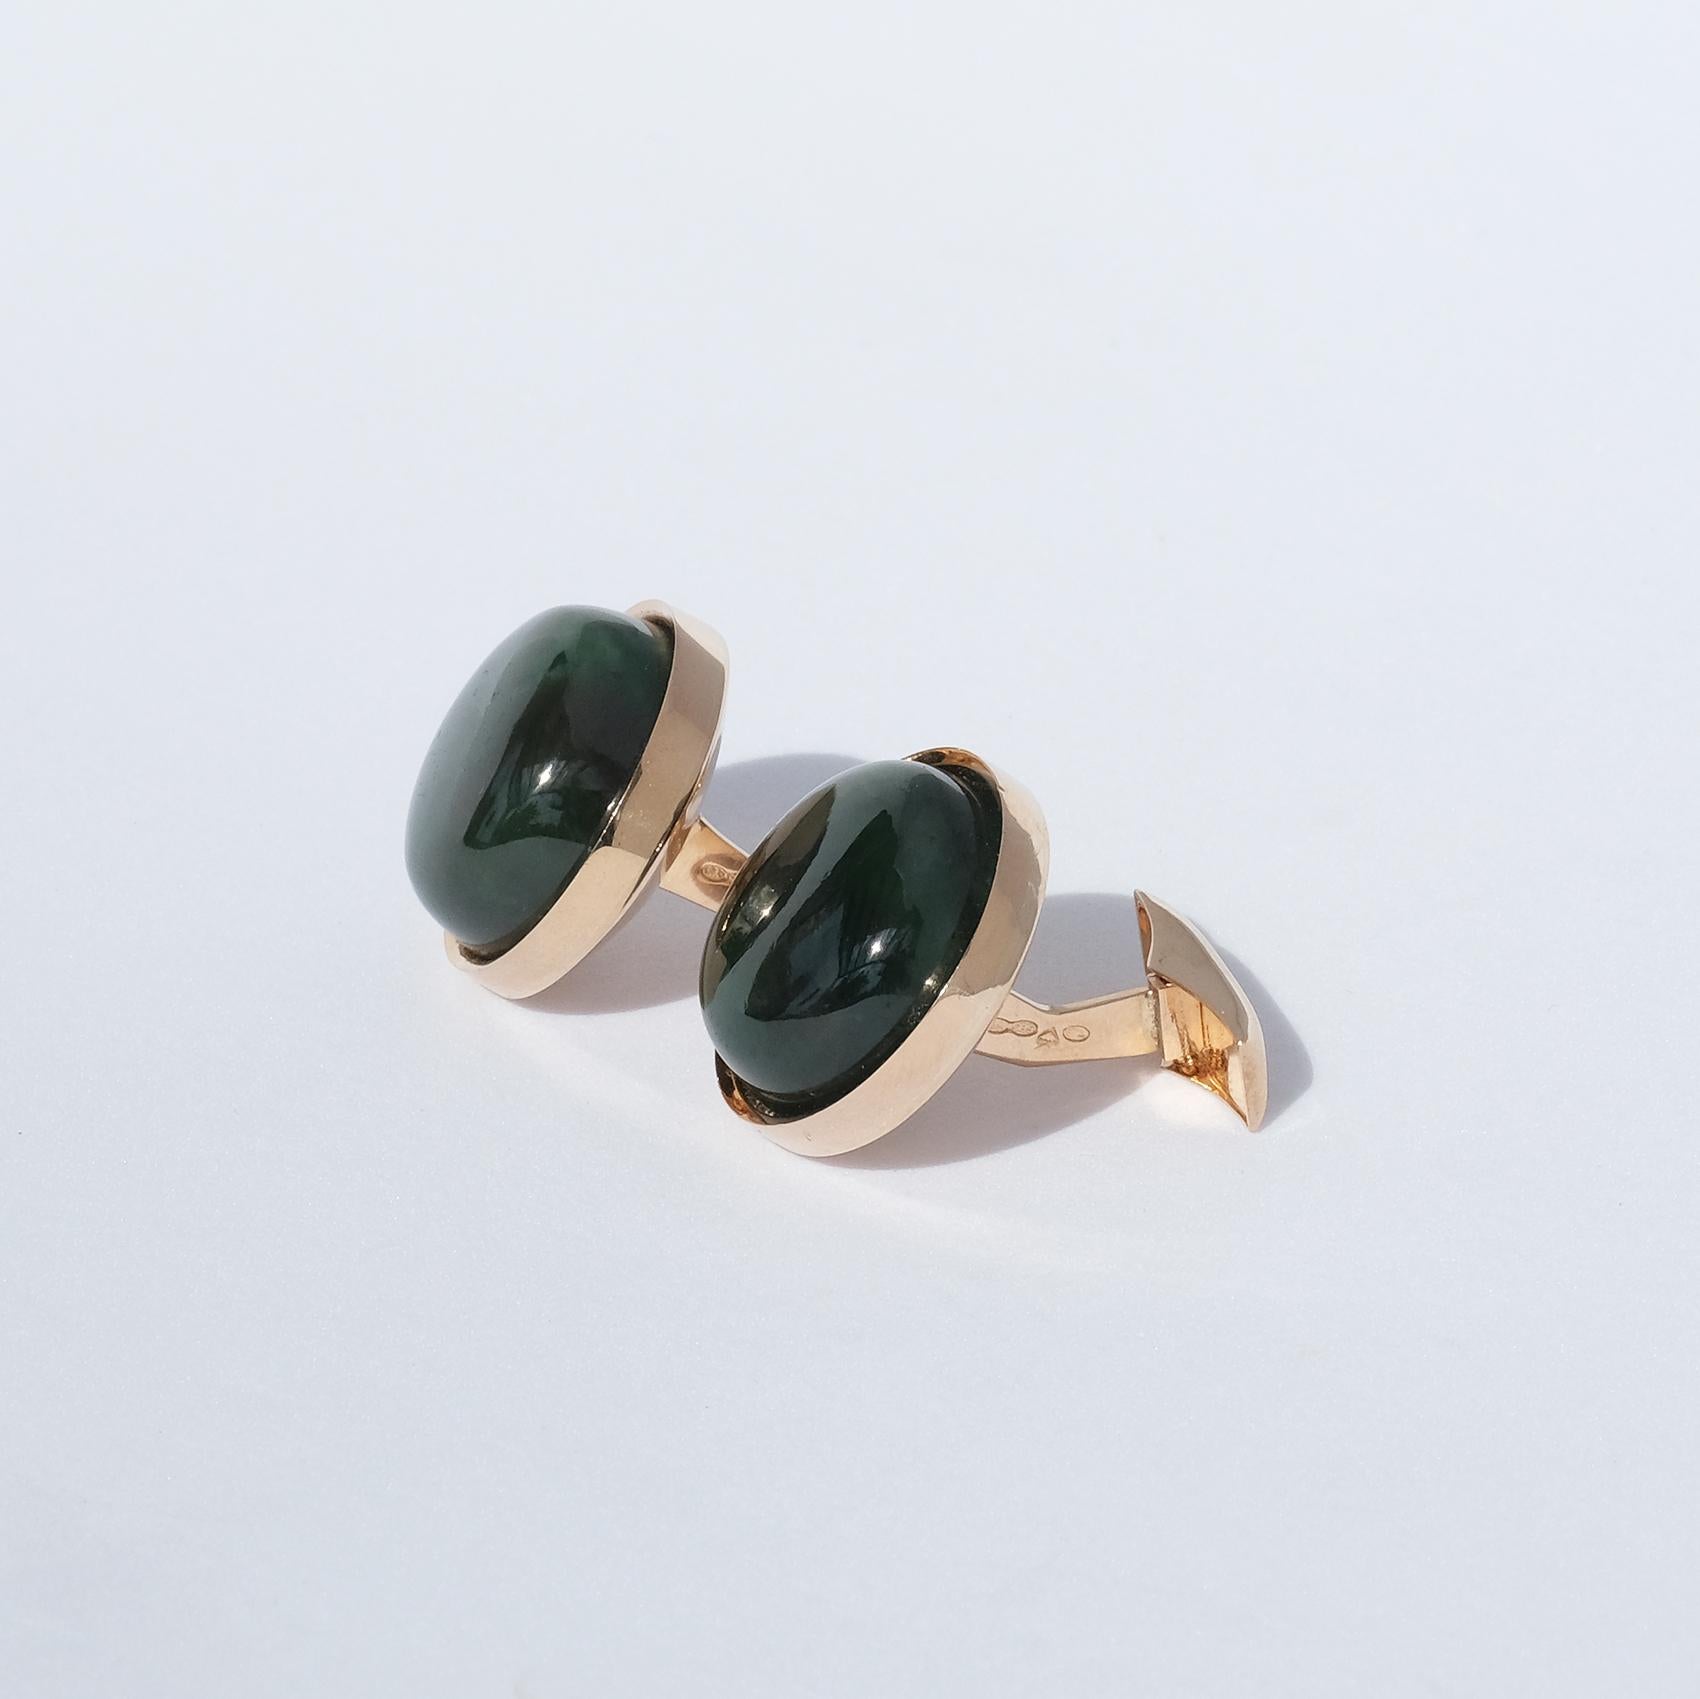 This pair of 14 karat gold and green garnet cufflinks have a round and soft shape. They have a classic look and will work well at any occasion. 